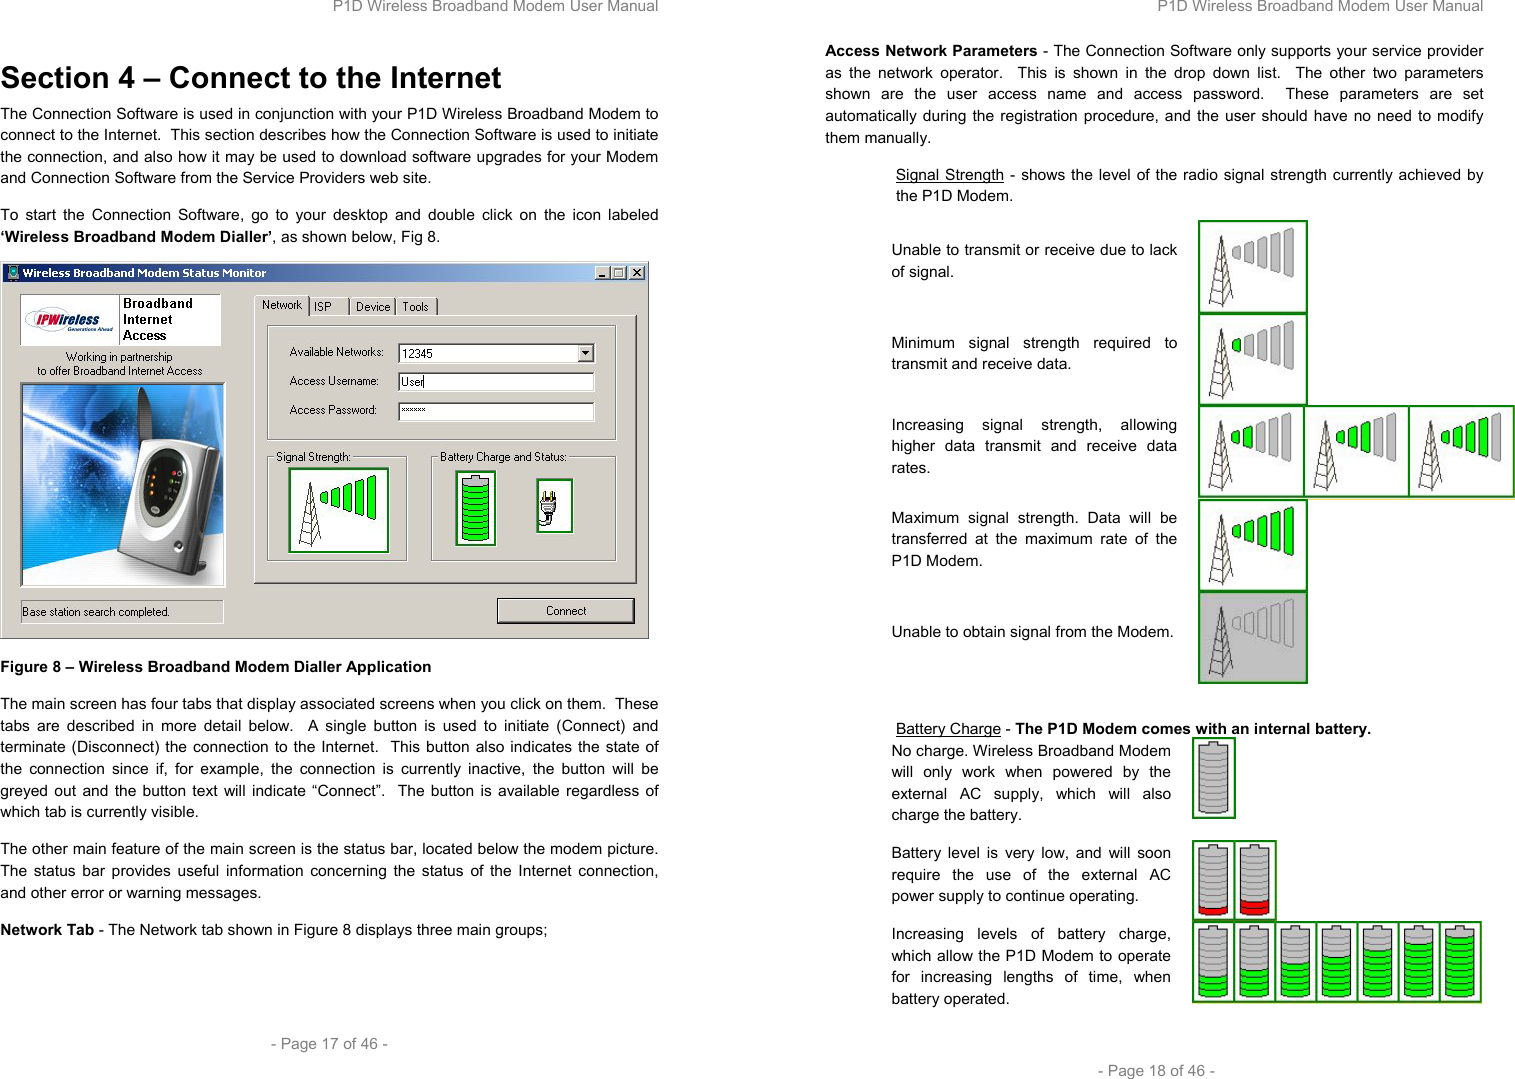 P1D Wireless Broadband Modem User Manual  - Page 17 of 46 -  Section 4 – Connect to the Internet The Connection Software is used in conjunction with your P1D Wireless Broadband Modem to connect to the Internet.  This section describes how the Connection Software is used to initiate the connection, and also how it may be used to download software upgrades for your Modem and Connection Software from the Service Providers web site. To start the Connection Software, go to your desktop and double click on the icon labeled ‘Wireless Broadband Modem Dialler’, as shown below, Fig 8.  Figure 8 – Wireless Broadband Modem Dialler Application The main screen has four tabs that display associated screens when you click on them.  These tabs are described in more detail below.  A single button is used to initiate (Connect) and terminate (Disconnect) the connection to the Internet.  This button also indicates the state of the connection since if, for example, the connection is currently inactive, the button will be greyed out and the button text will indicate “Connect”.  The button is available regardless of which tab is currently visible.  The other main feature of the main screen is the status bar, located below the modem picture.  The status bar provides useful information concerning the status of the Internet connection, and other error or warning messages. Network Tab - The Network tab shown in Figure 8 displays three main groups;  P1D Wireless Broadband Modem User Manual  - Page 18 of 46 - Access Network Parameters - The Connection Software only supports your service provider as the network operator.  This is shown in the drop down list.  The other two parameters shown are the user access name and access password.  These parameters are set automatically during the registration procedure, and the user should have no need to modify them manually.  Signal Strength - shows the level of the radio signal strength currently achieved by the P1D Modem. Unable to transmit or receive due to lack of signal.  Minimum signal strength required to transmit and receive data.  Increasing signal strength, allowing higher data transmit and receive data rates.  Maximum signal strength. Data will be transferred at the maximum rate of the P1D Modem.  Unable to obtain signal from the Modem.    Battery Charge - The P1D Modem comes with an internal battery.  No charge. Wireless Broadband Modem will only work when powered by the external AC supply, which will also charge the battery.   Battery level is very low, and will soon require the use of the external AC power supply to continue operating.  Increasing levels of battery charge, which allow the P1D Modem to operate for increasing lengths of time, when battery operated.   